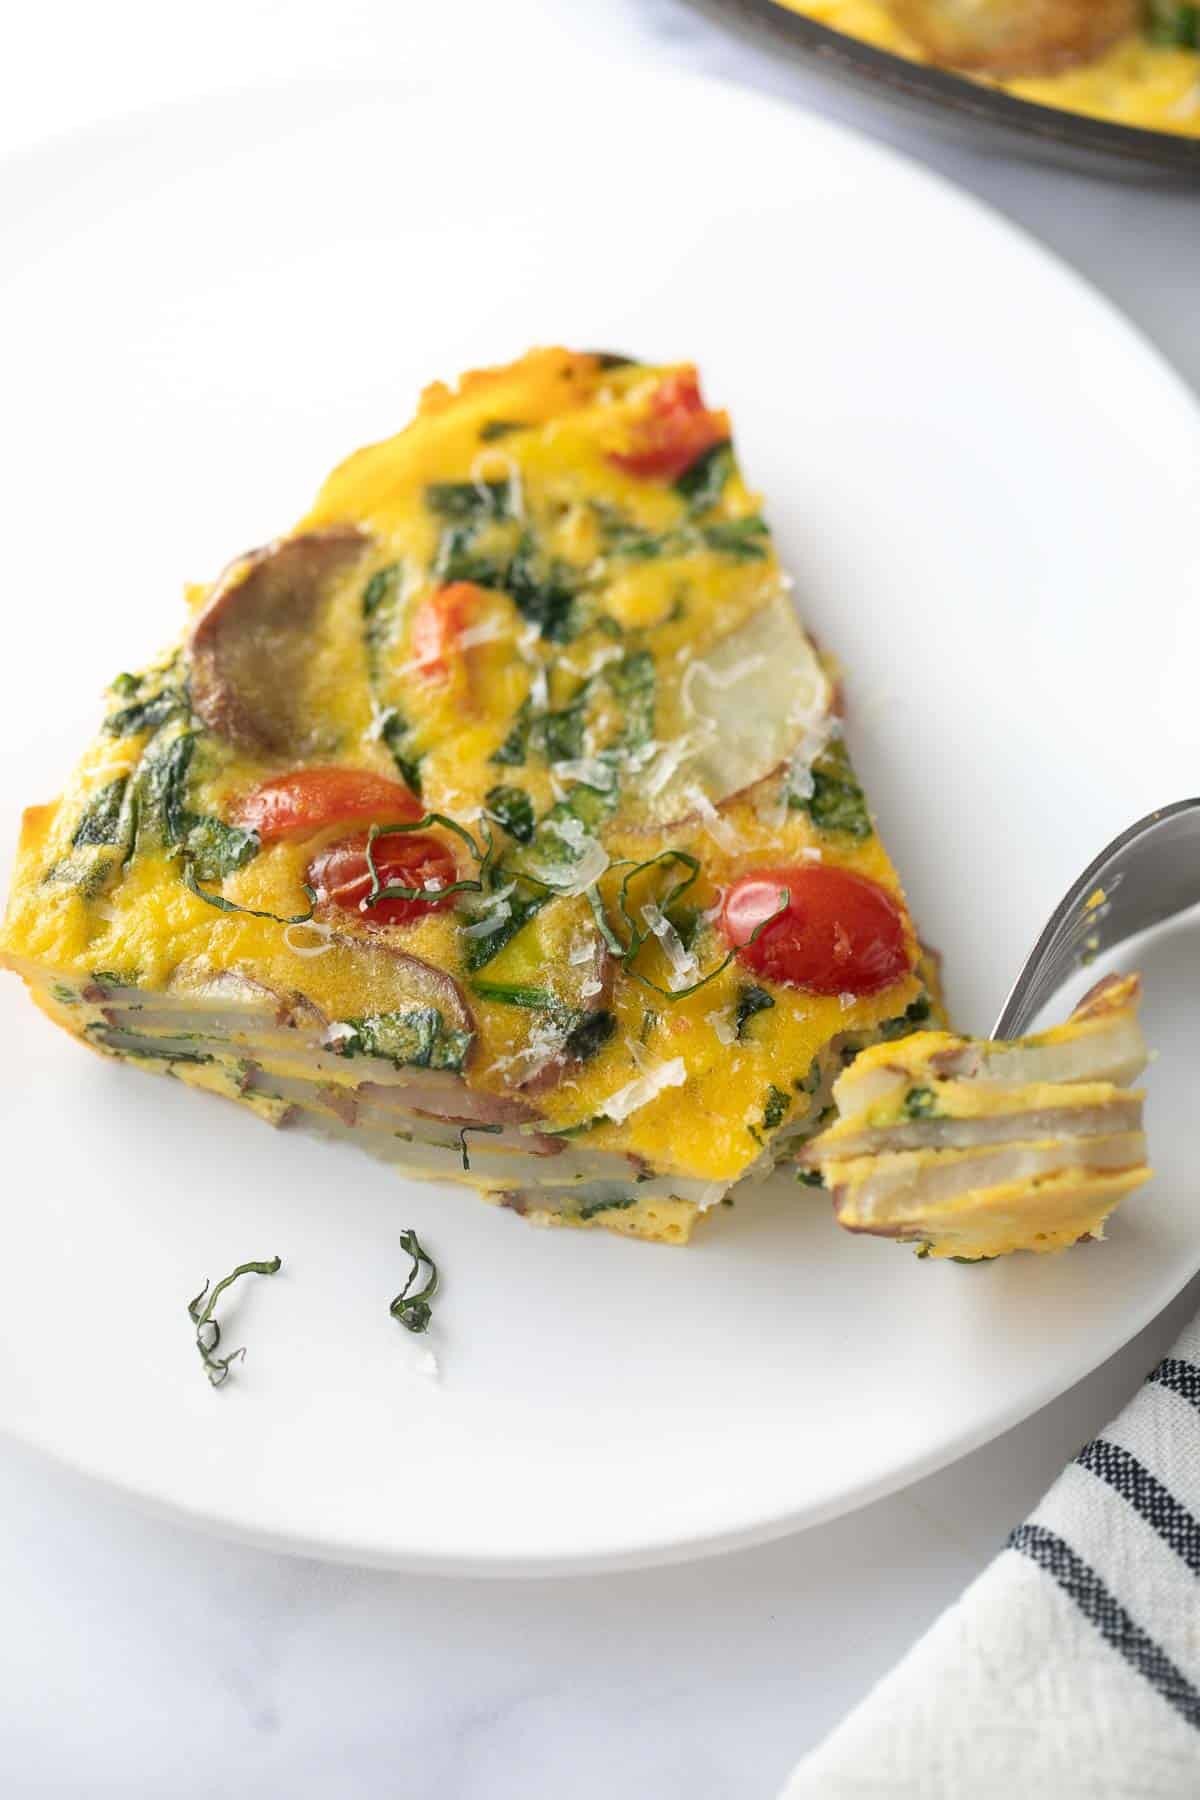 oven baked frittata with potatoes